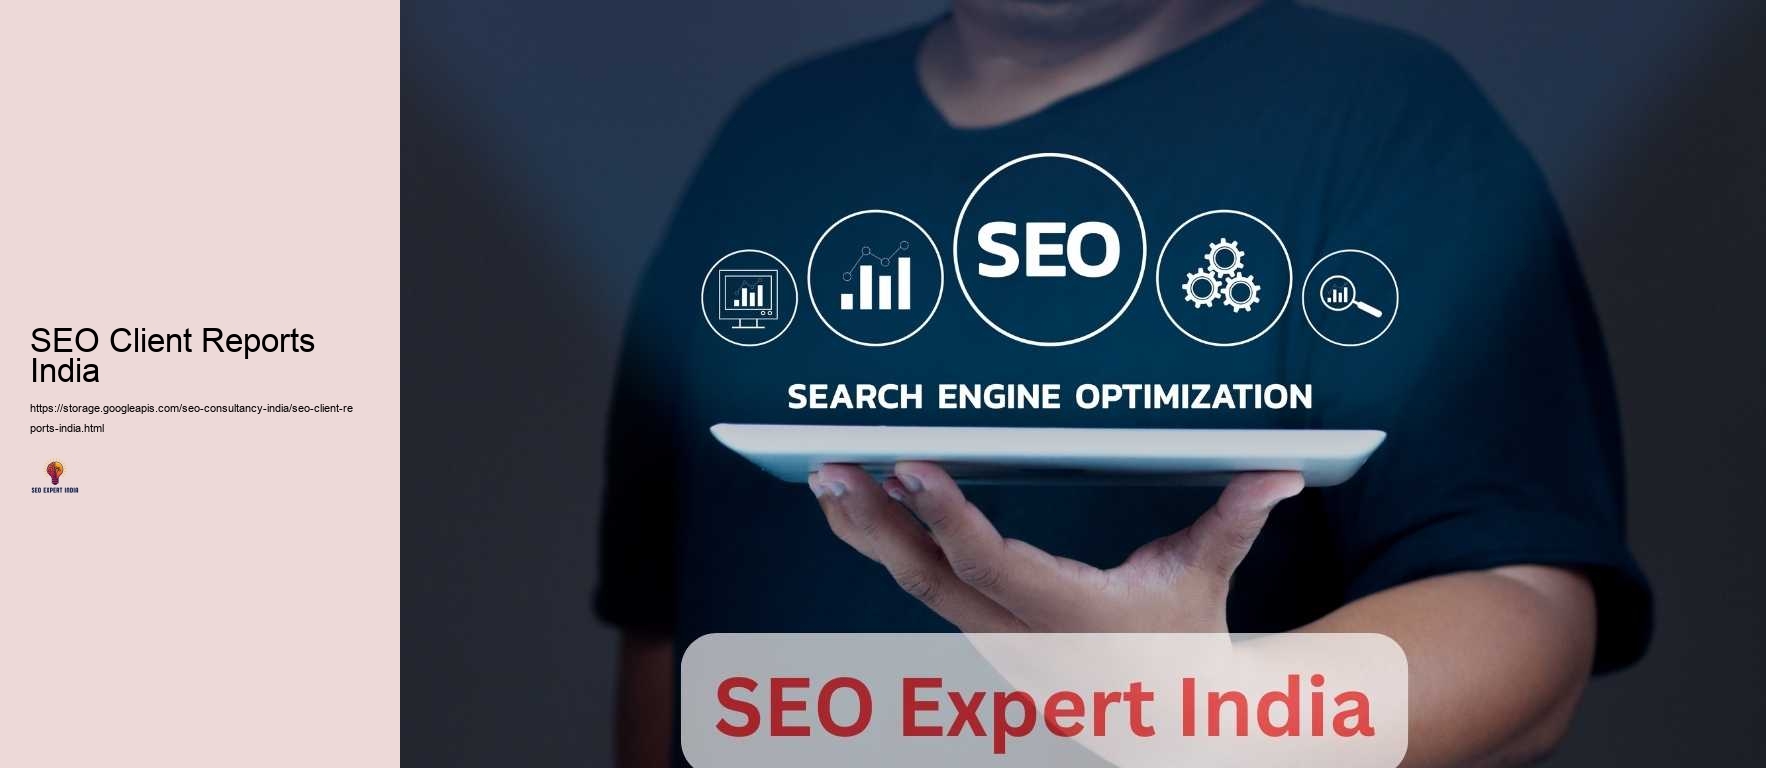 SEO Client Reports India